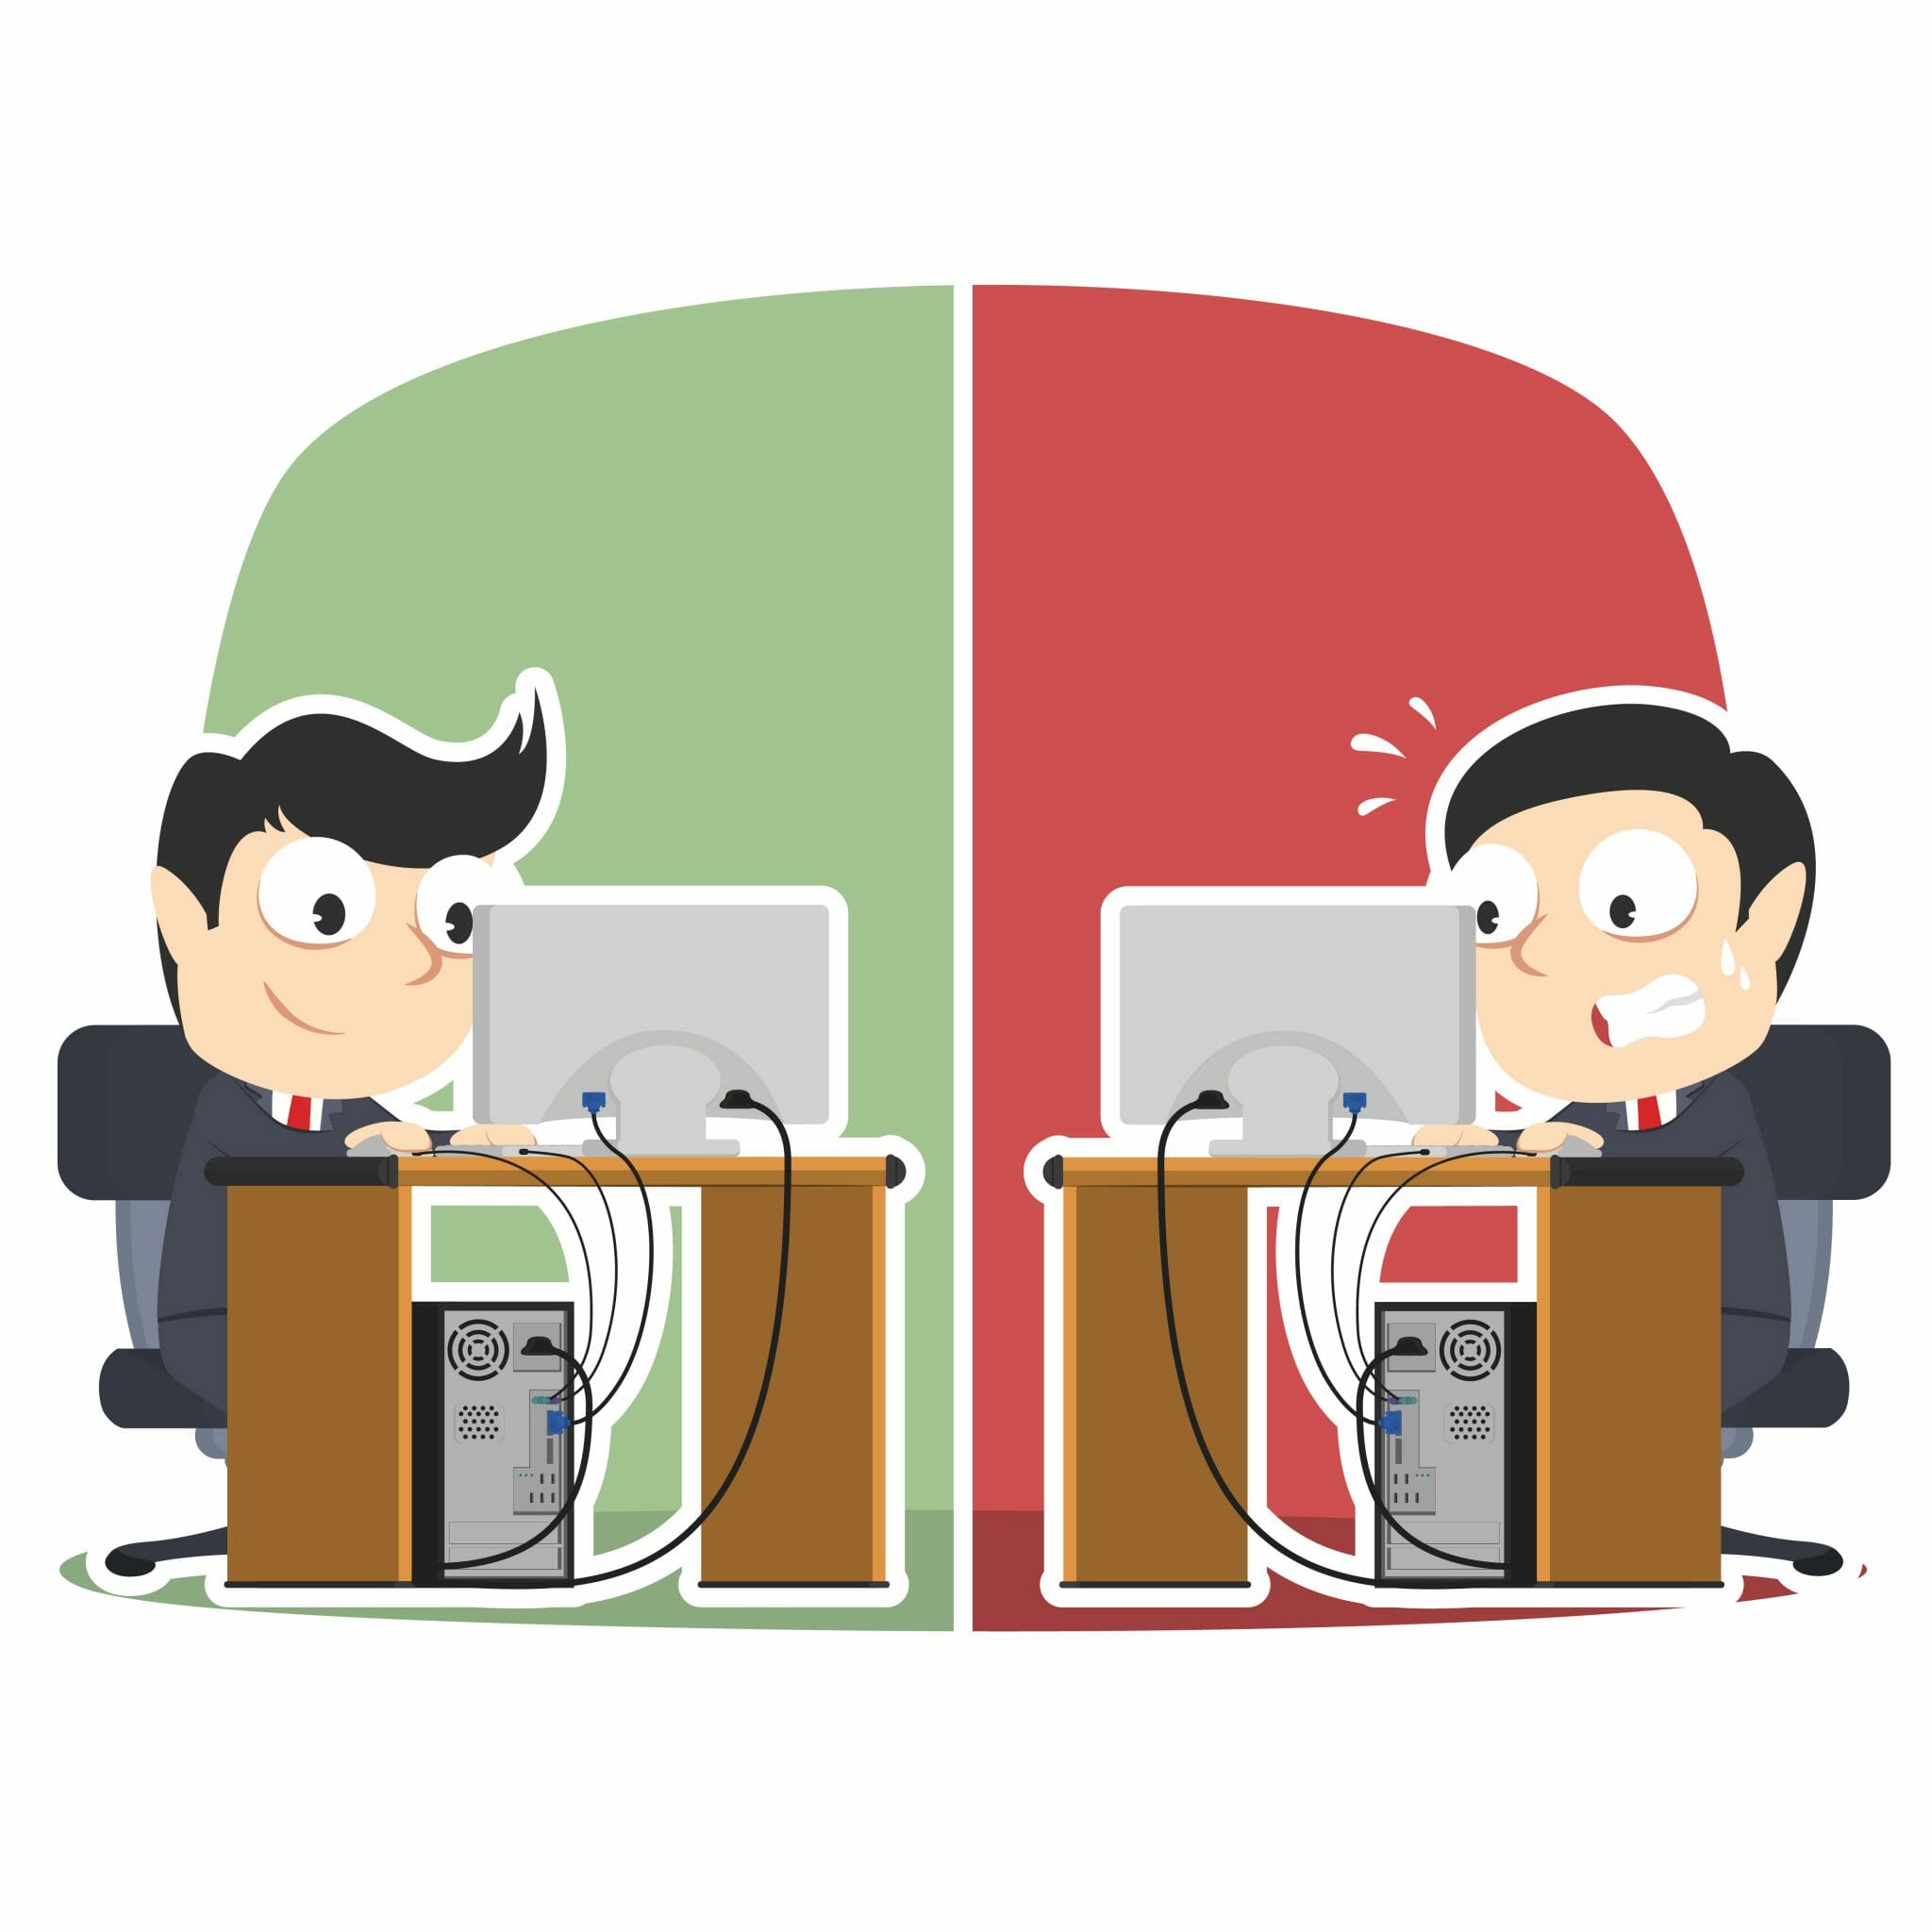 Two men at a computer working in a vector art style